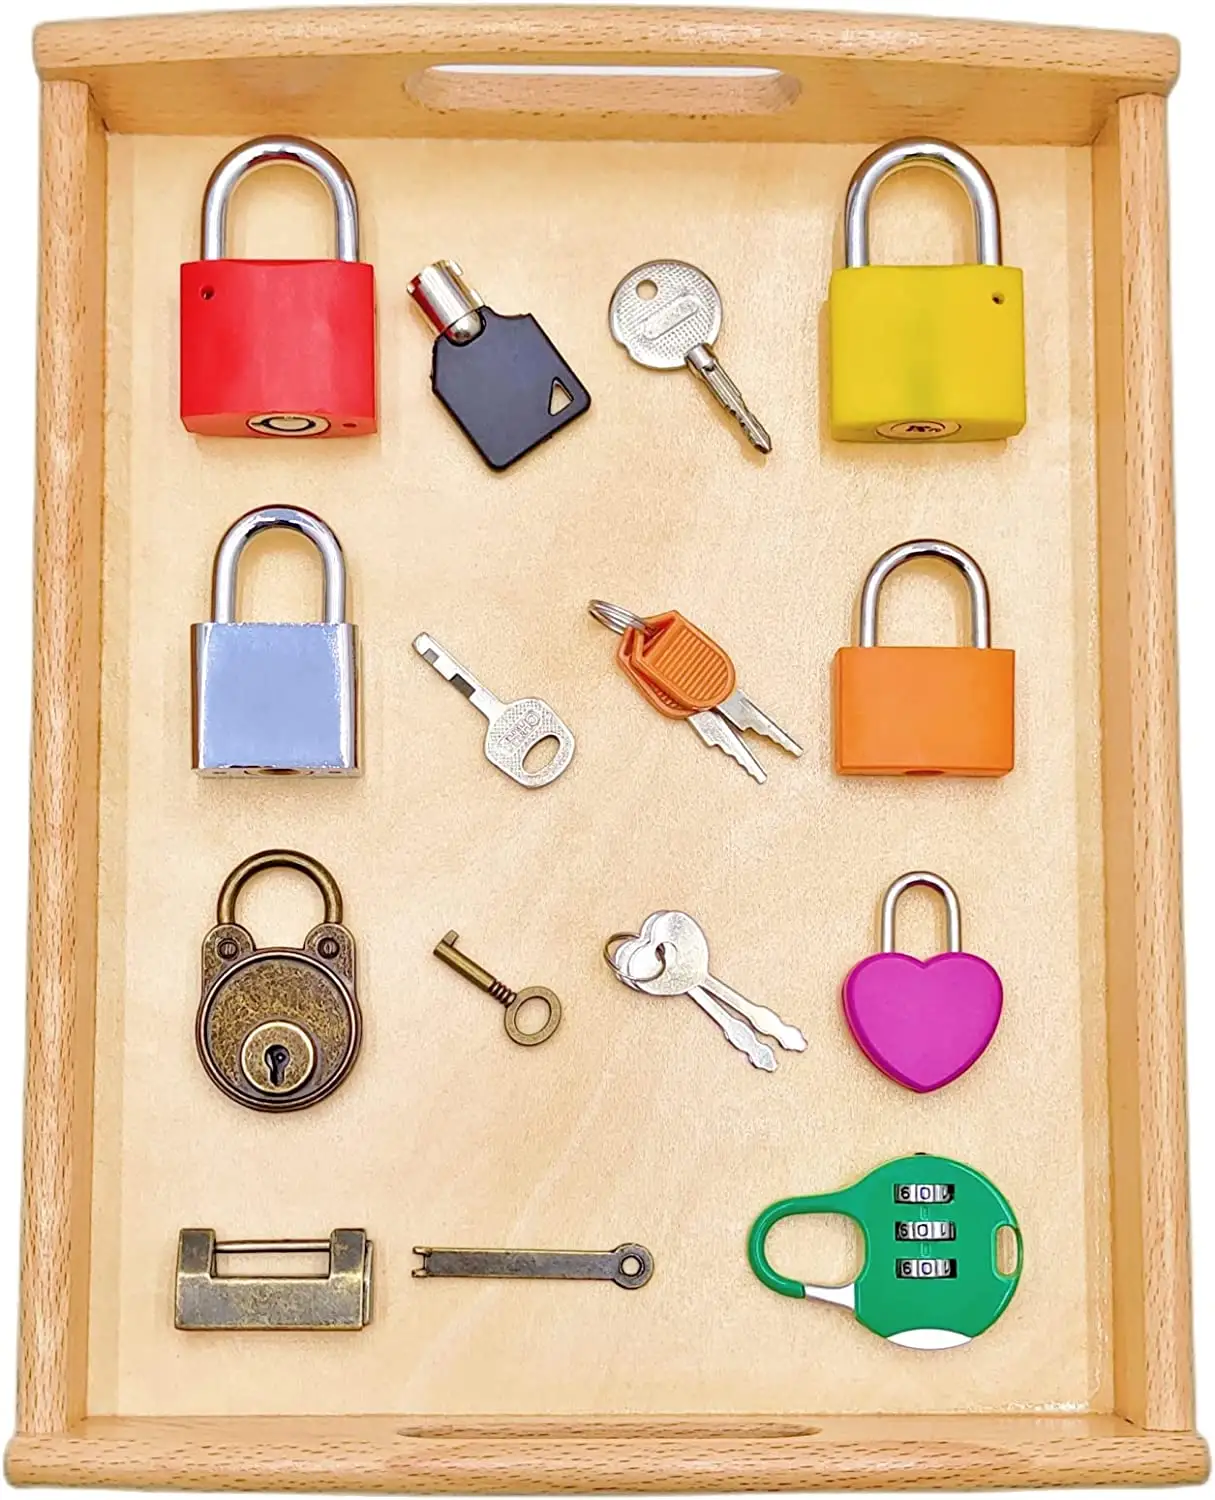 Key and lock Toys for toddlers